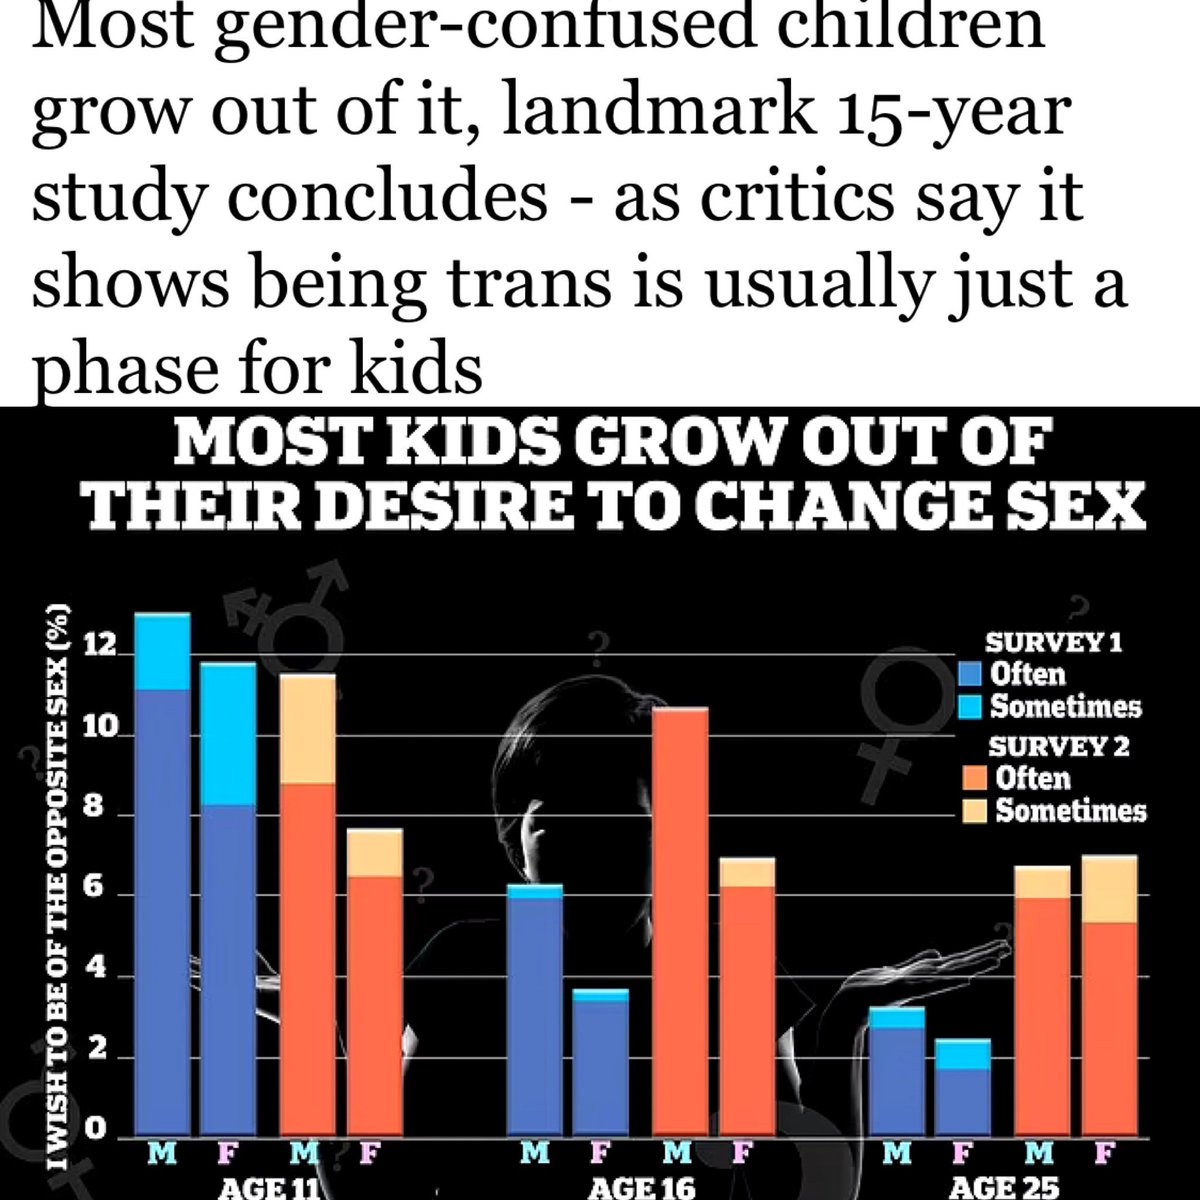 The majority of gender-confused children grow out of that feeling by the time they are fully grown adults, according to a long-term study. It goes down from 1 in 10 at age 11 (11%) to 1 in 25 at age 25 (4%) dailymail.co.uk/health/article…